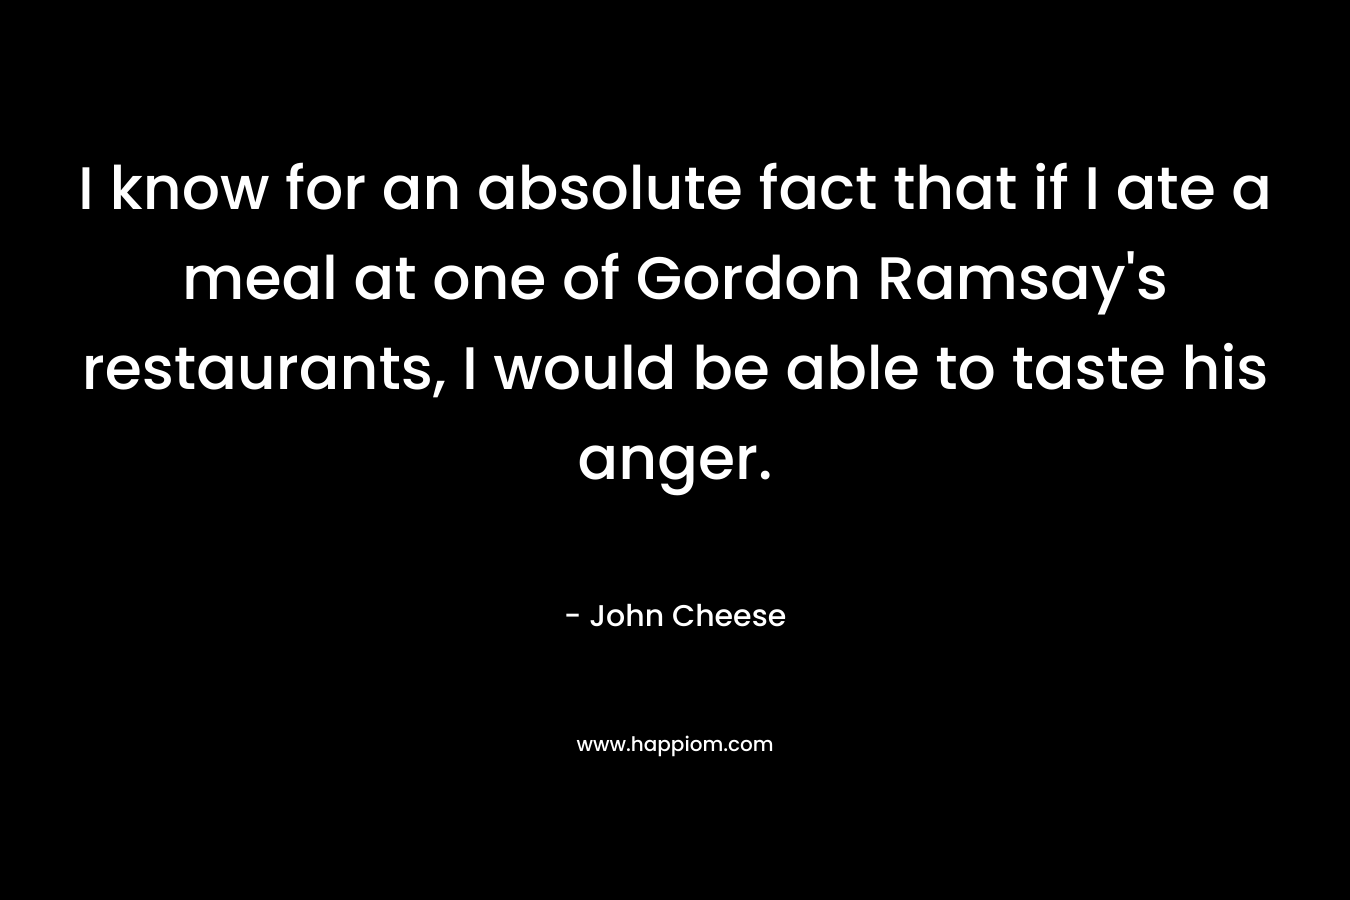 I know for an absolute fact that if I ate a meal at one of Gordon Ramsay's restaurants, I would be able to taste his anger.